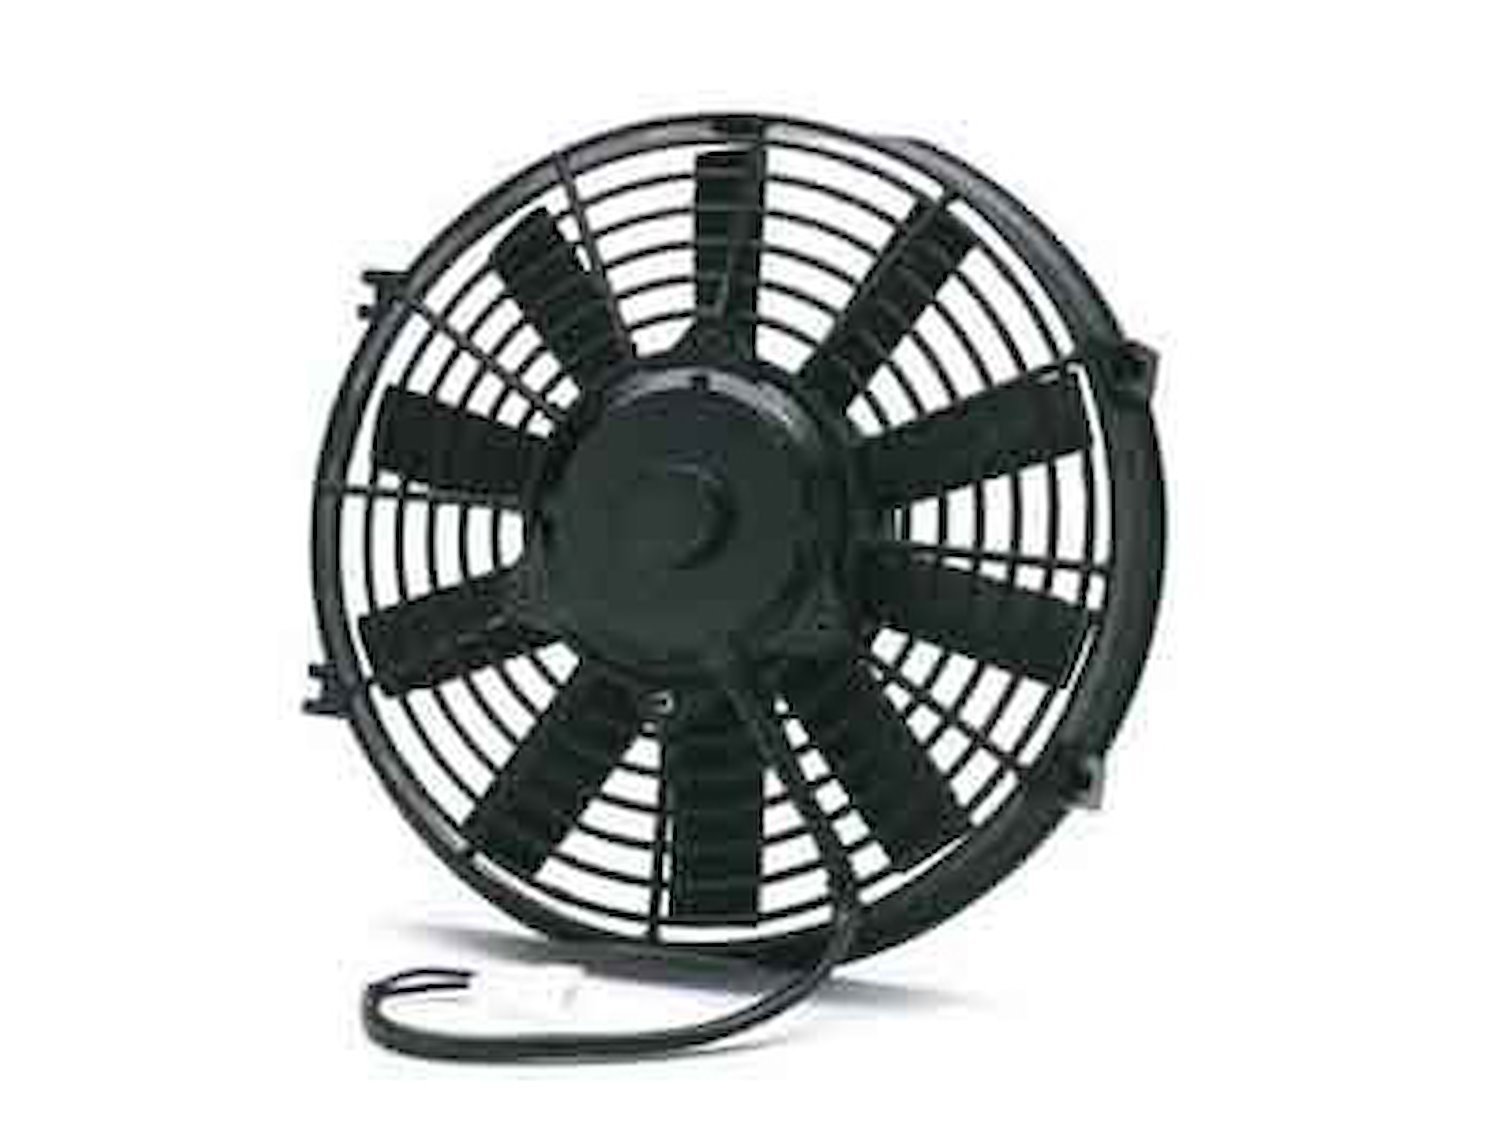 9" Electric Fan : Thickness 3.2"  700 CFM  2600 RPM  5.5 amp draw